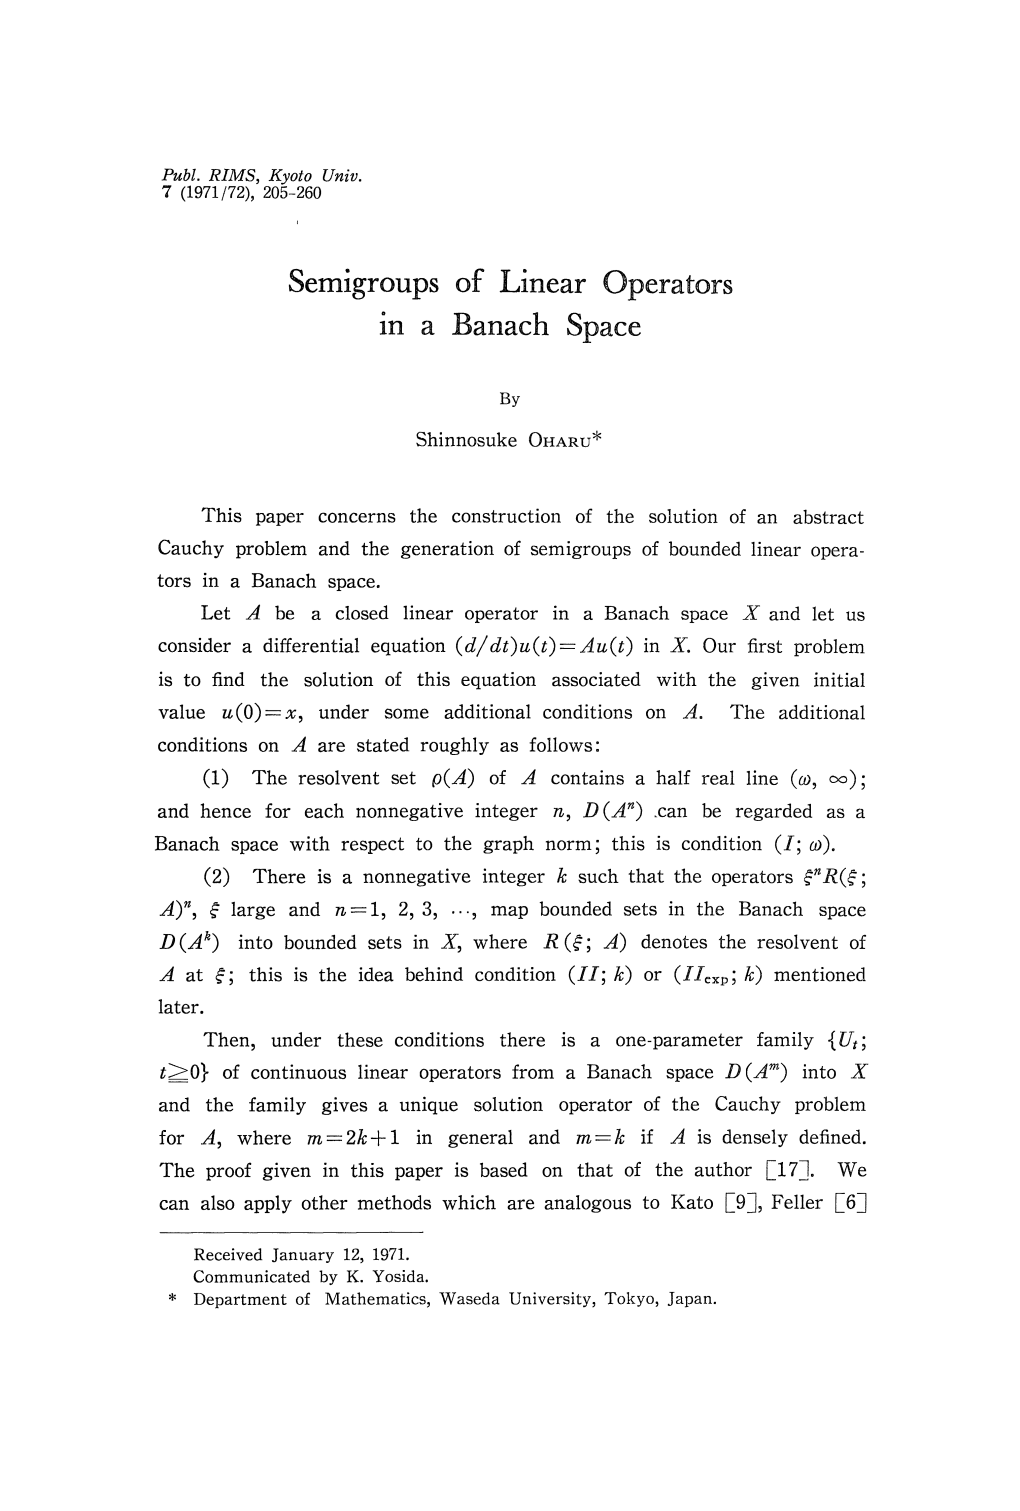 Semigroups of Linear Operators in a Banach Space